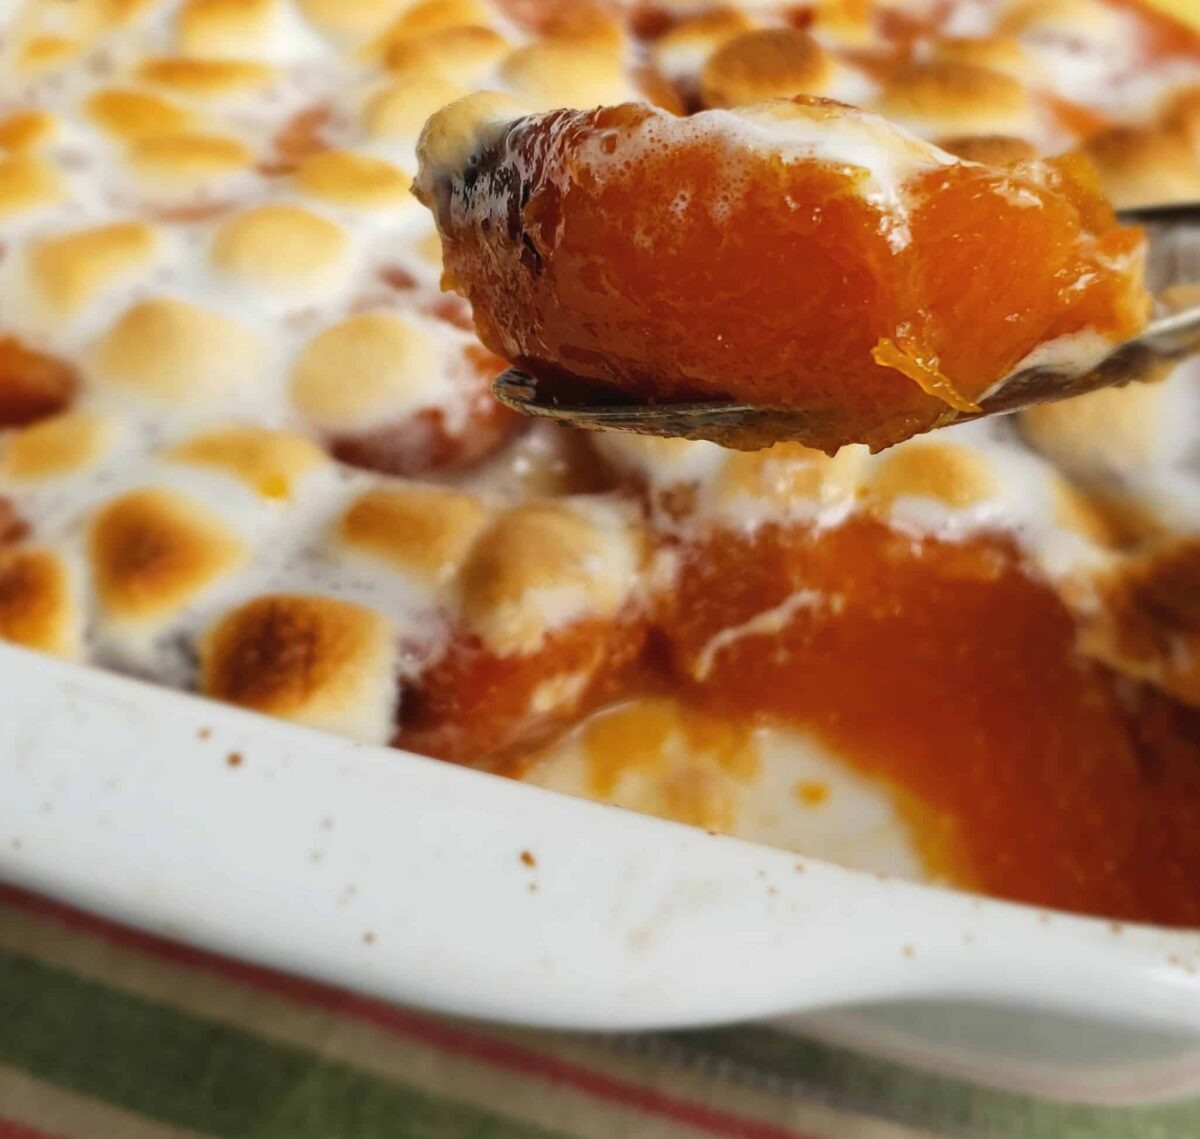 Spoonful of candied sweet potatoes lifted from white casserole dish topped with roasted marshmallows